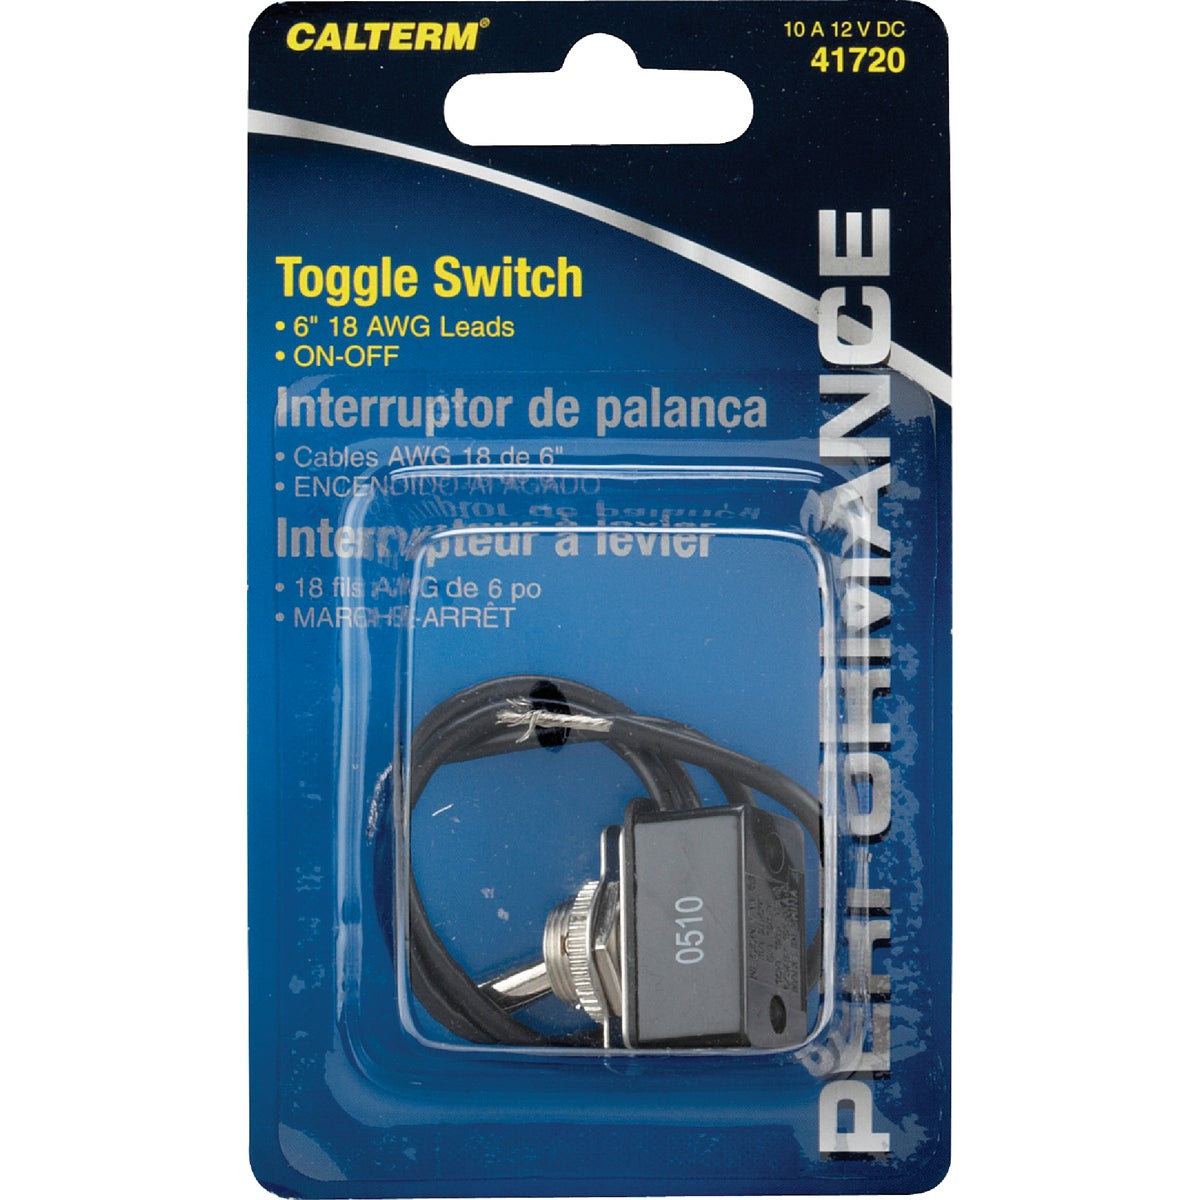 Item 572598, Pre-wired metal toggle switch. Lever operator. 2-position on/off.